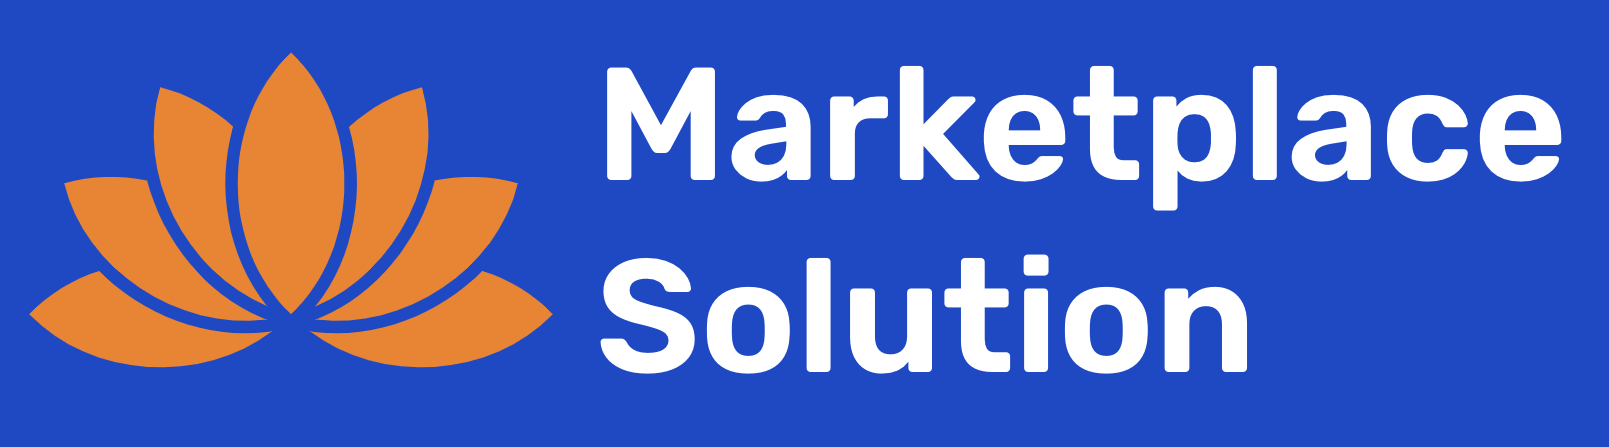 Marketplace Solution